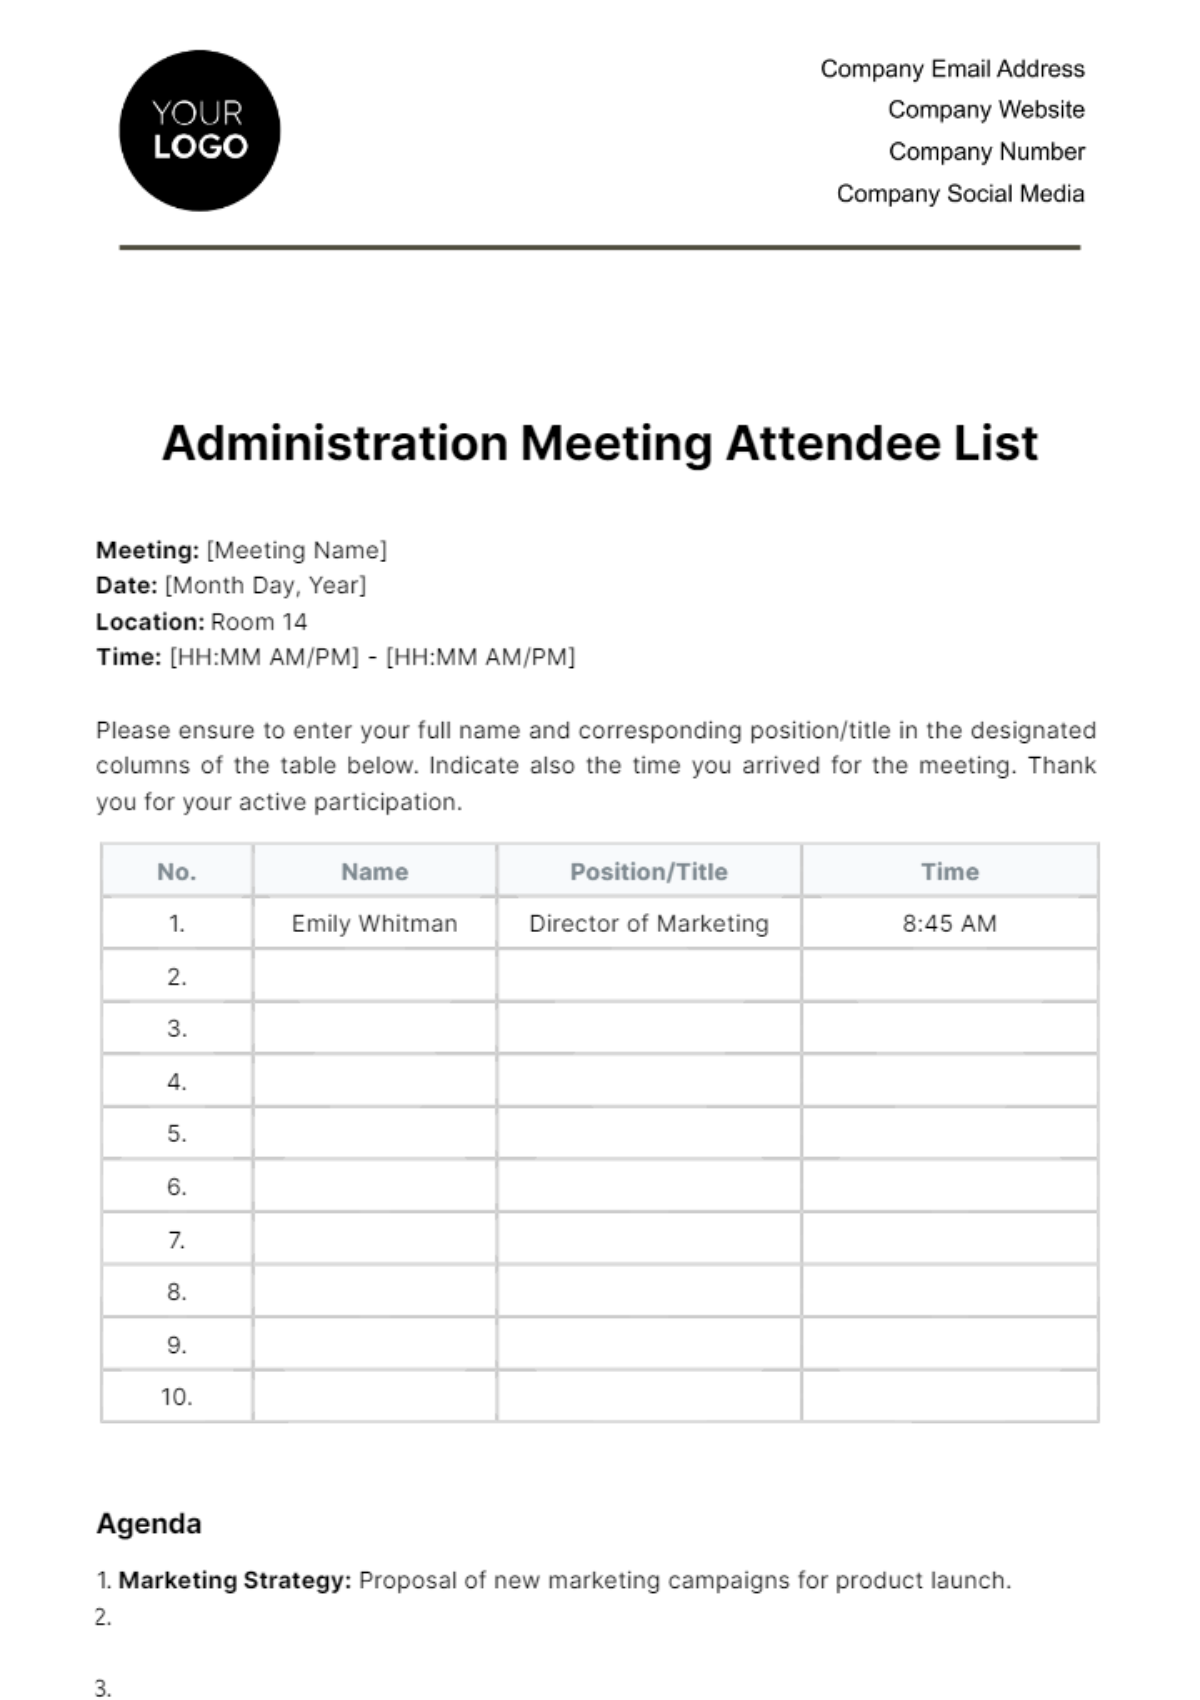 Free Administration Meeting Attendee List Template